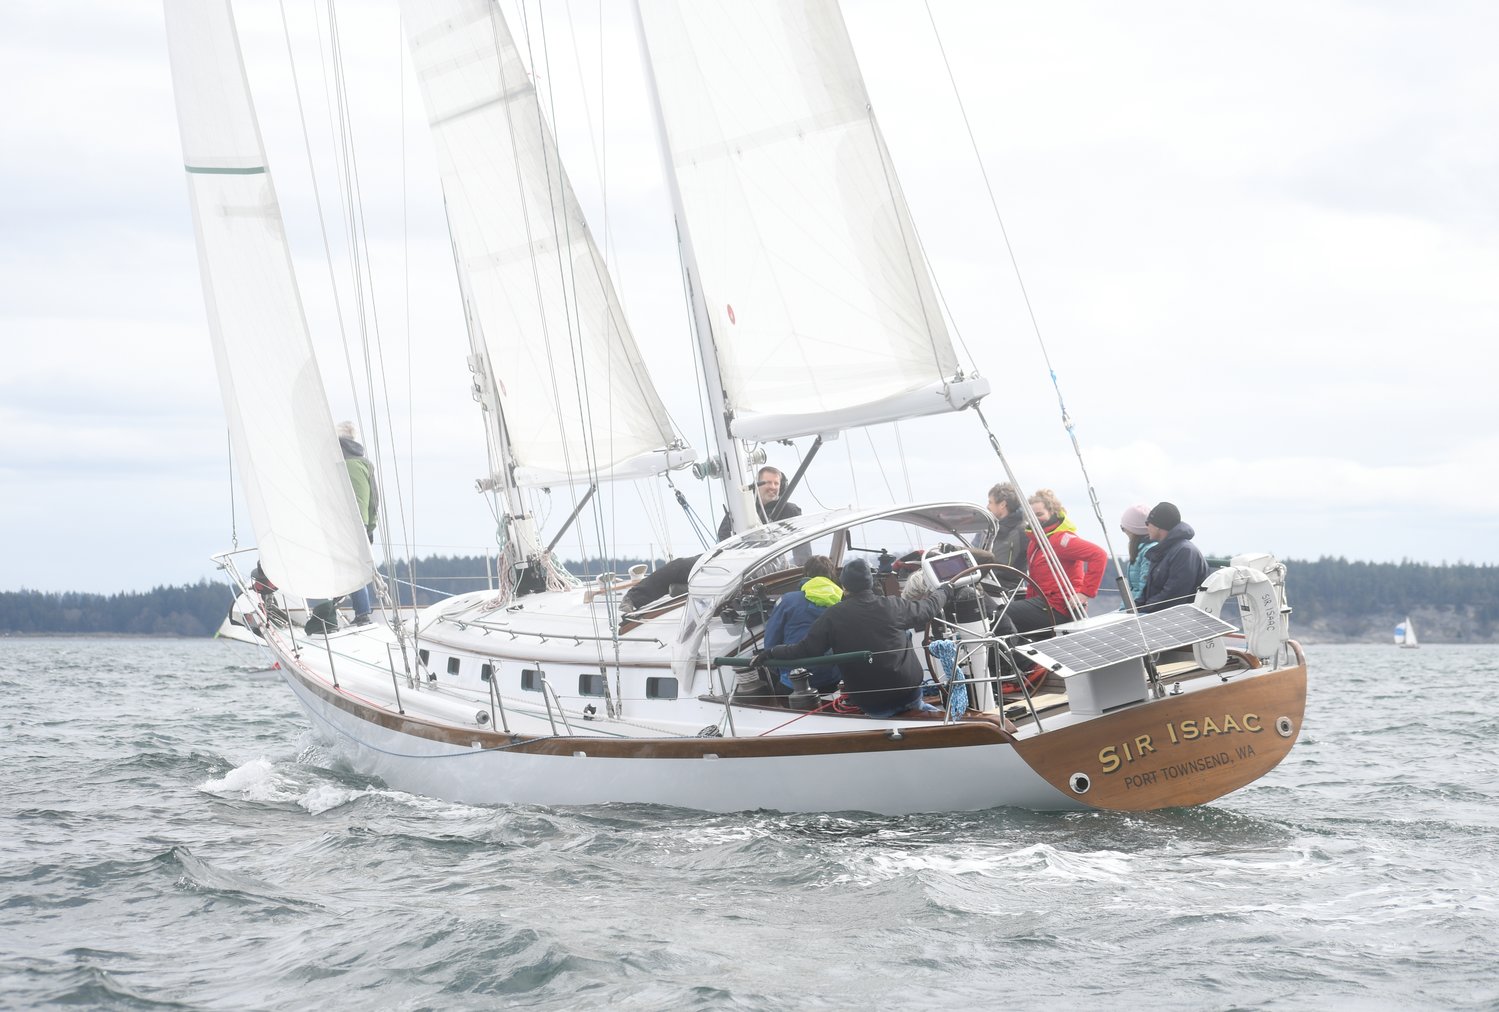 “Sir Isaac,” a stately 49-foot schooner owned and operated by locals Ann and John Bailey, races through the murky waters of Port Townsend Bay Saturday afternoon. The boat and crew placed first in the Racing Class for the 31st annual Shipwright’s Regatta sailboat race, winning the coveted Peg Leg trophy for a sublime performance at sea.